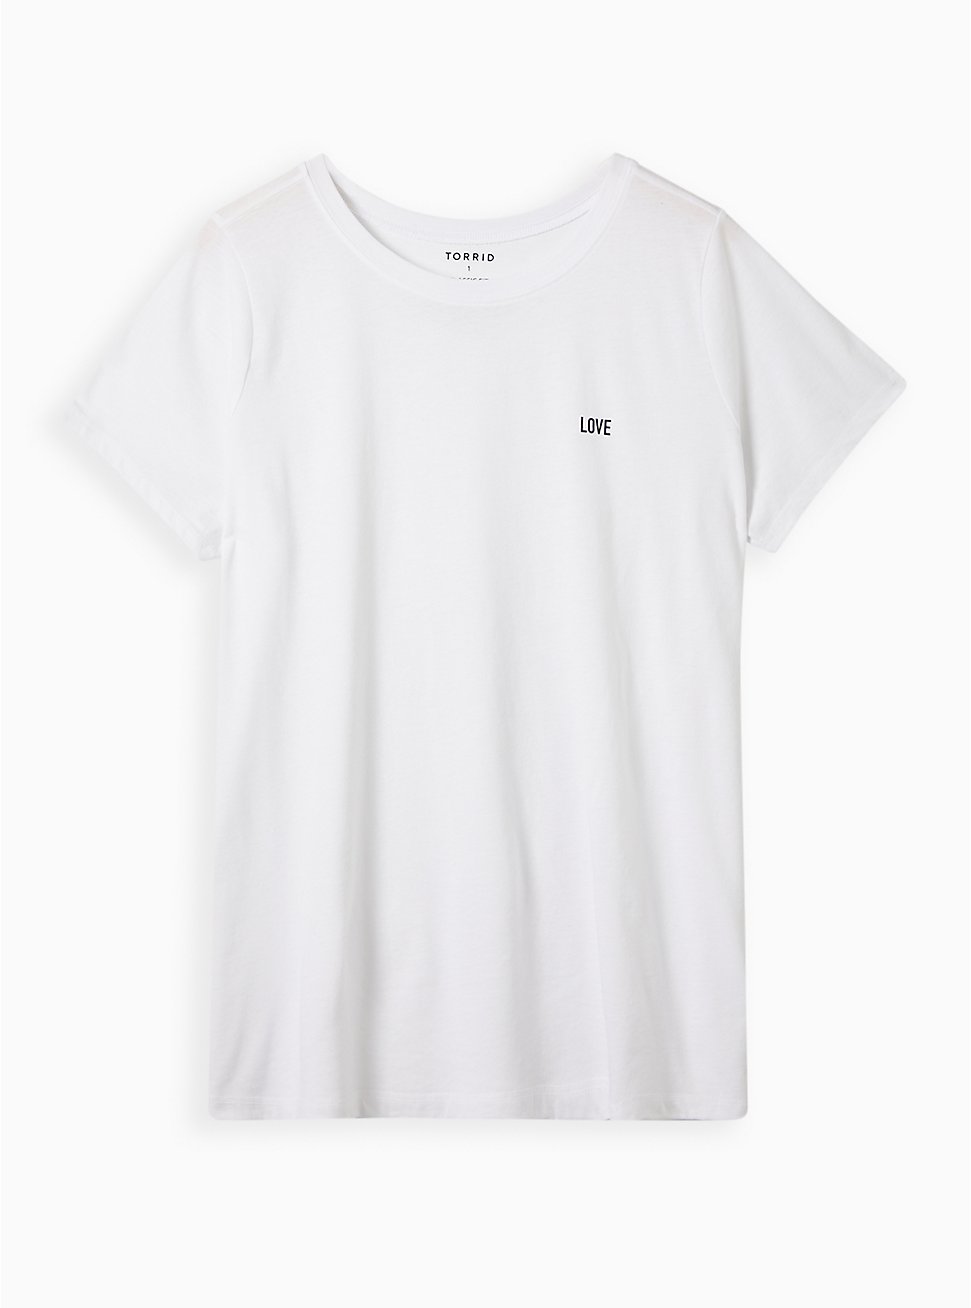 Plus Size Everyday Tee - Signature Jersey Micro Love White, BRIGHT WHITE, hi-res